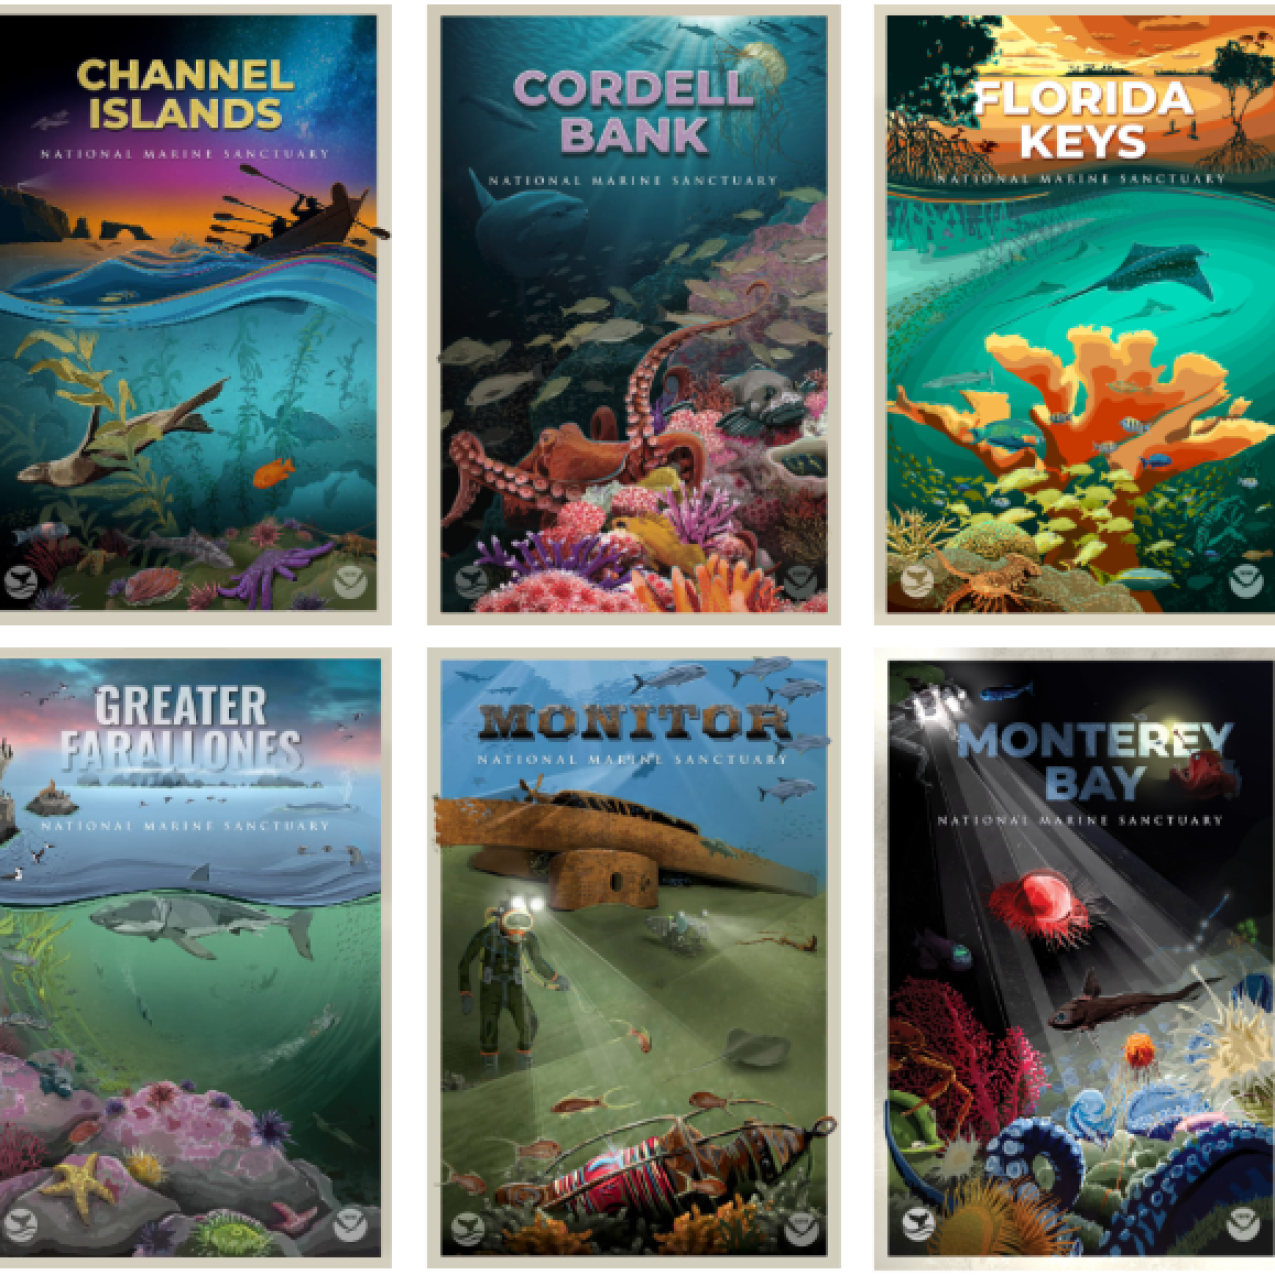 A grid of artistic posters with ocean art of different national marine sanctuaries.